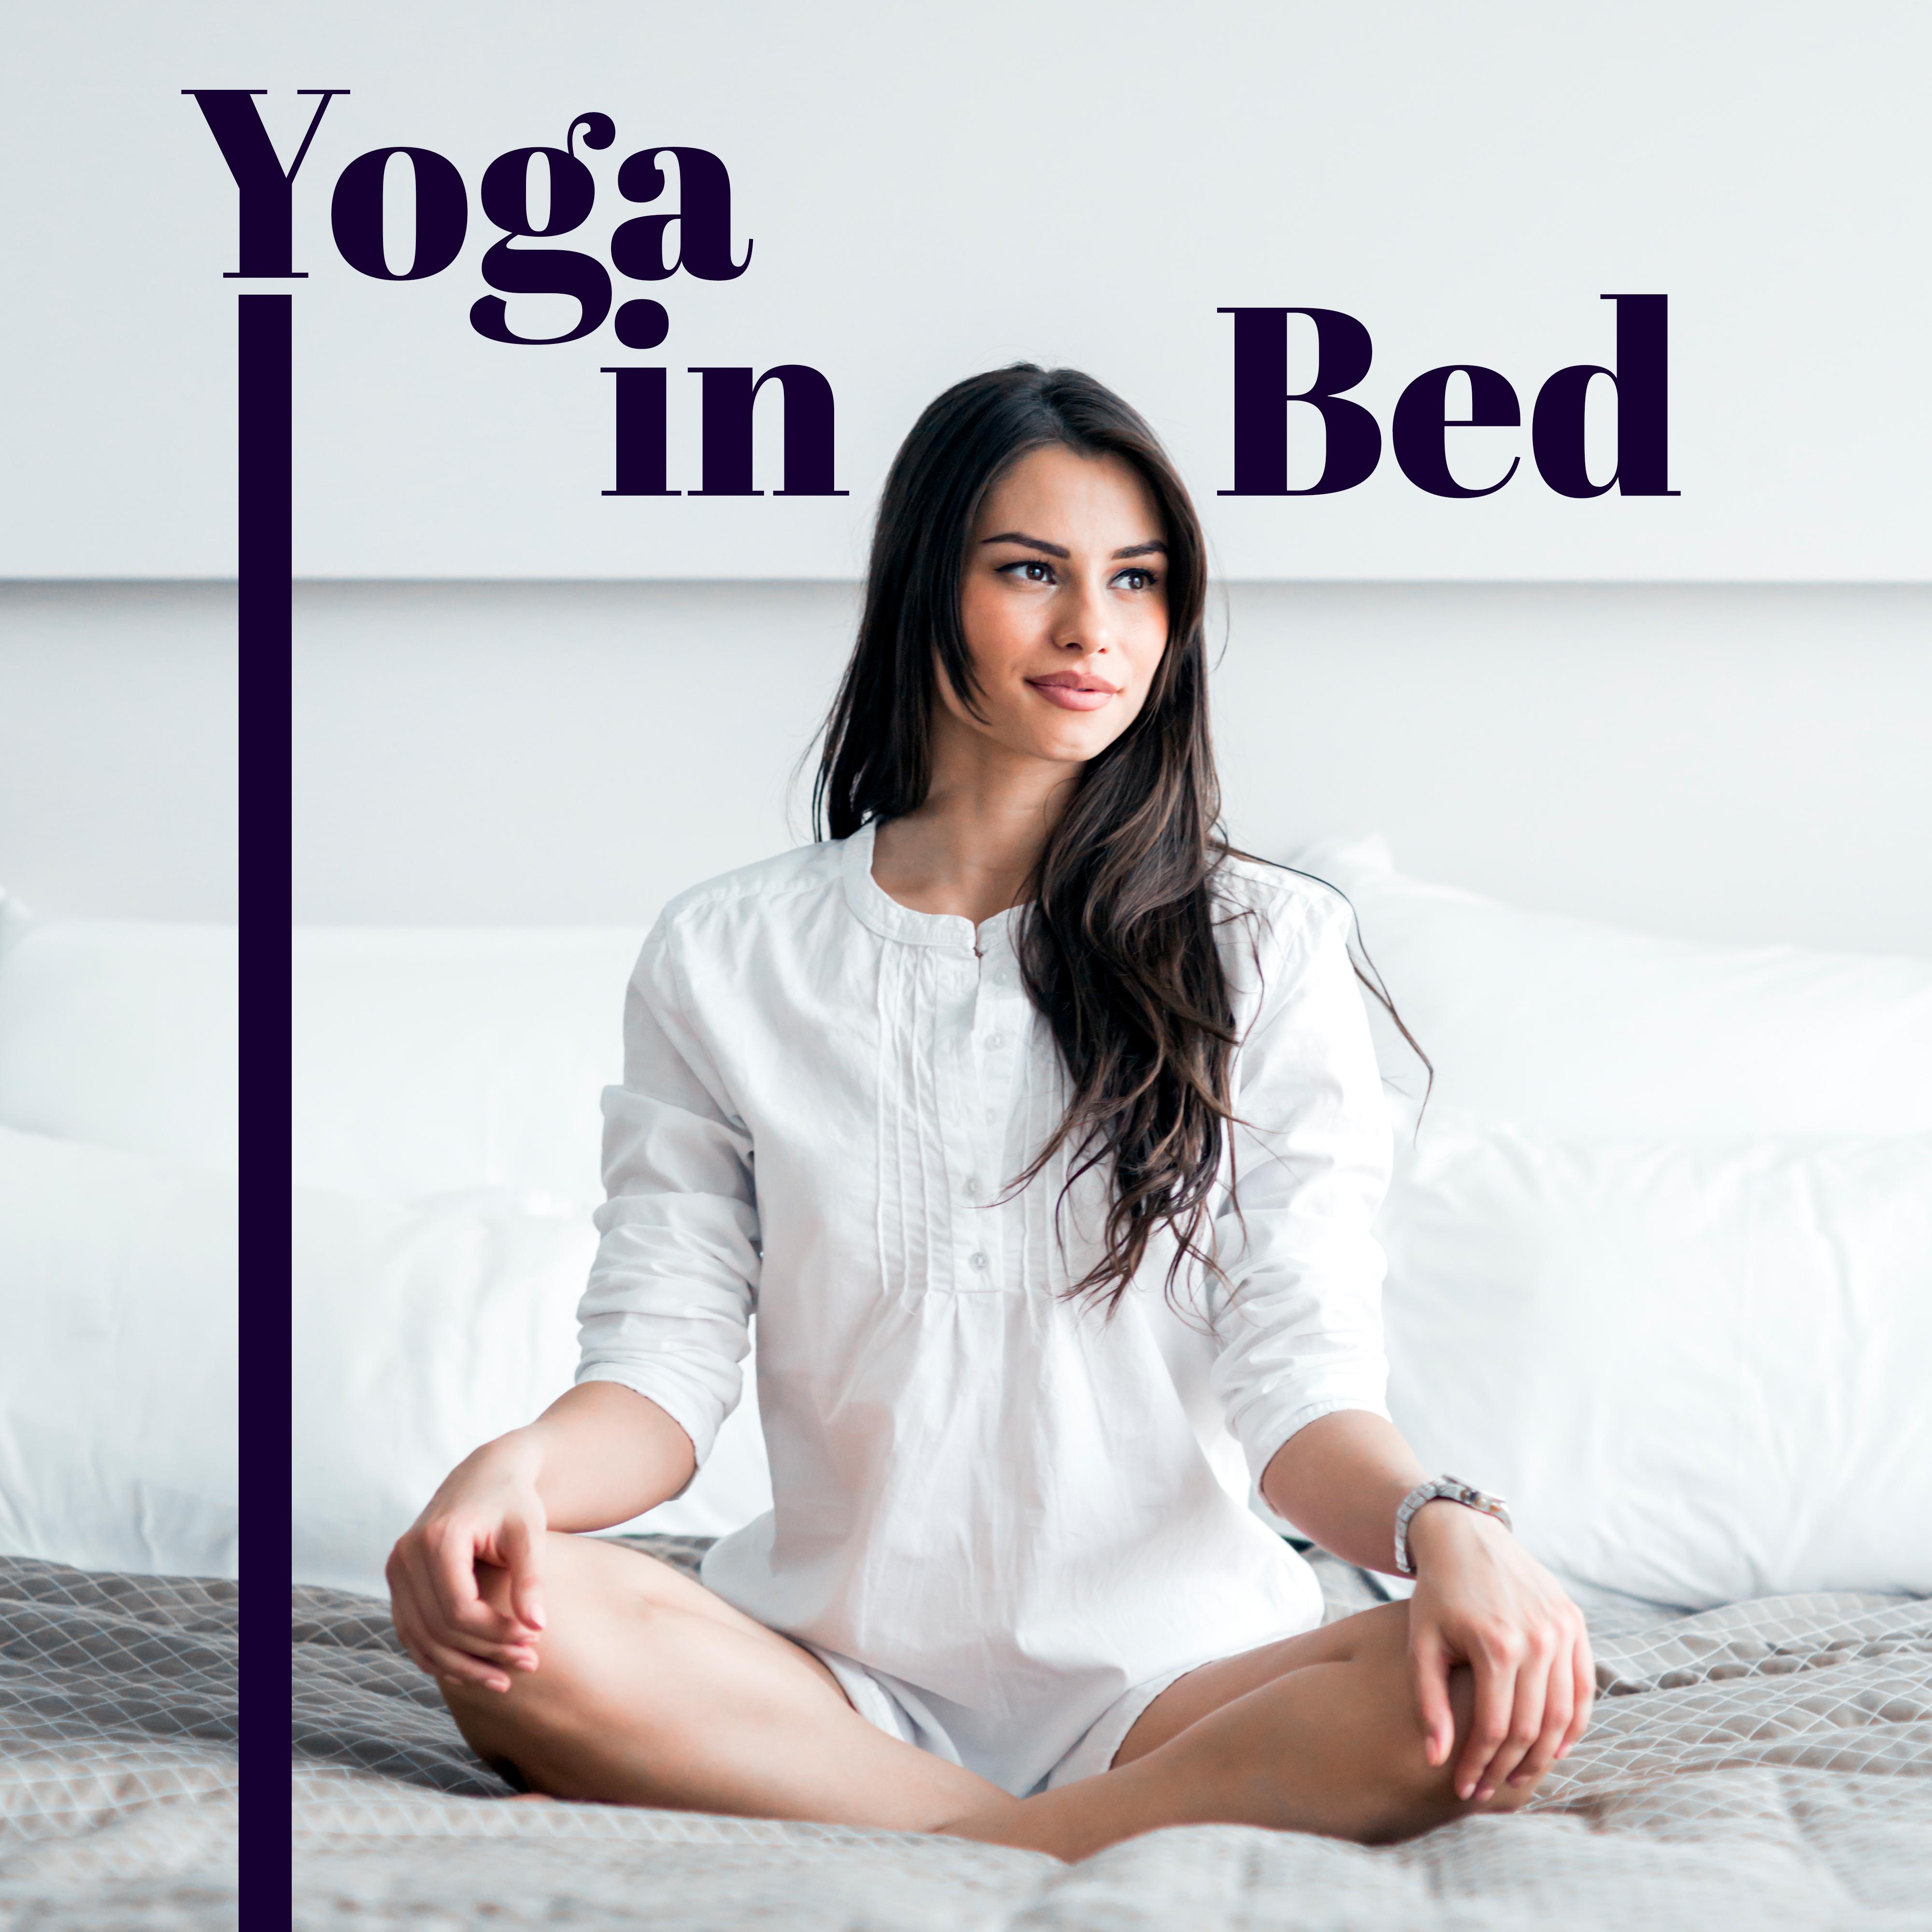 Yoga in Bed